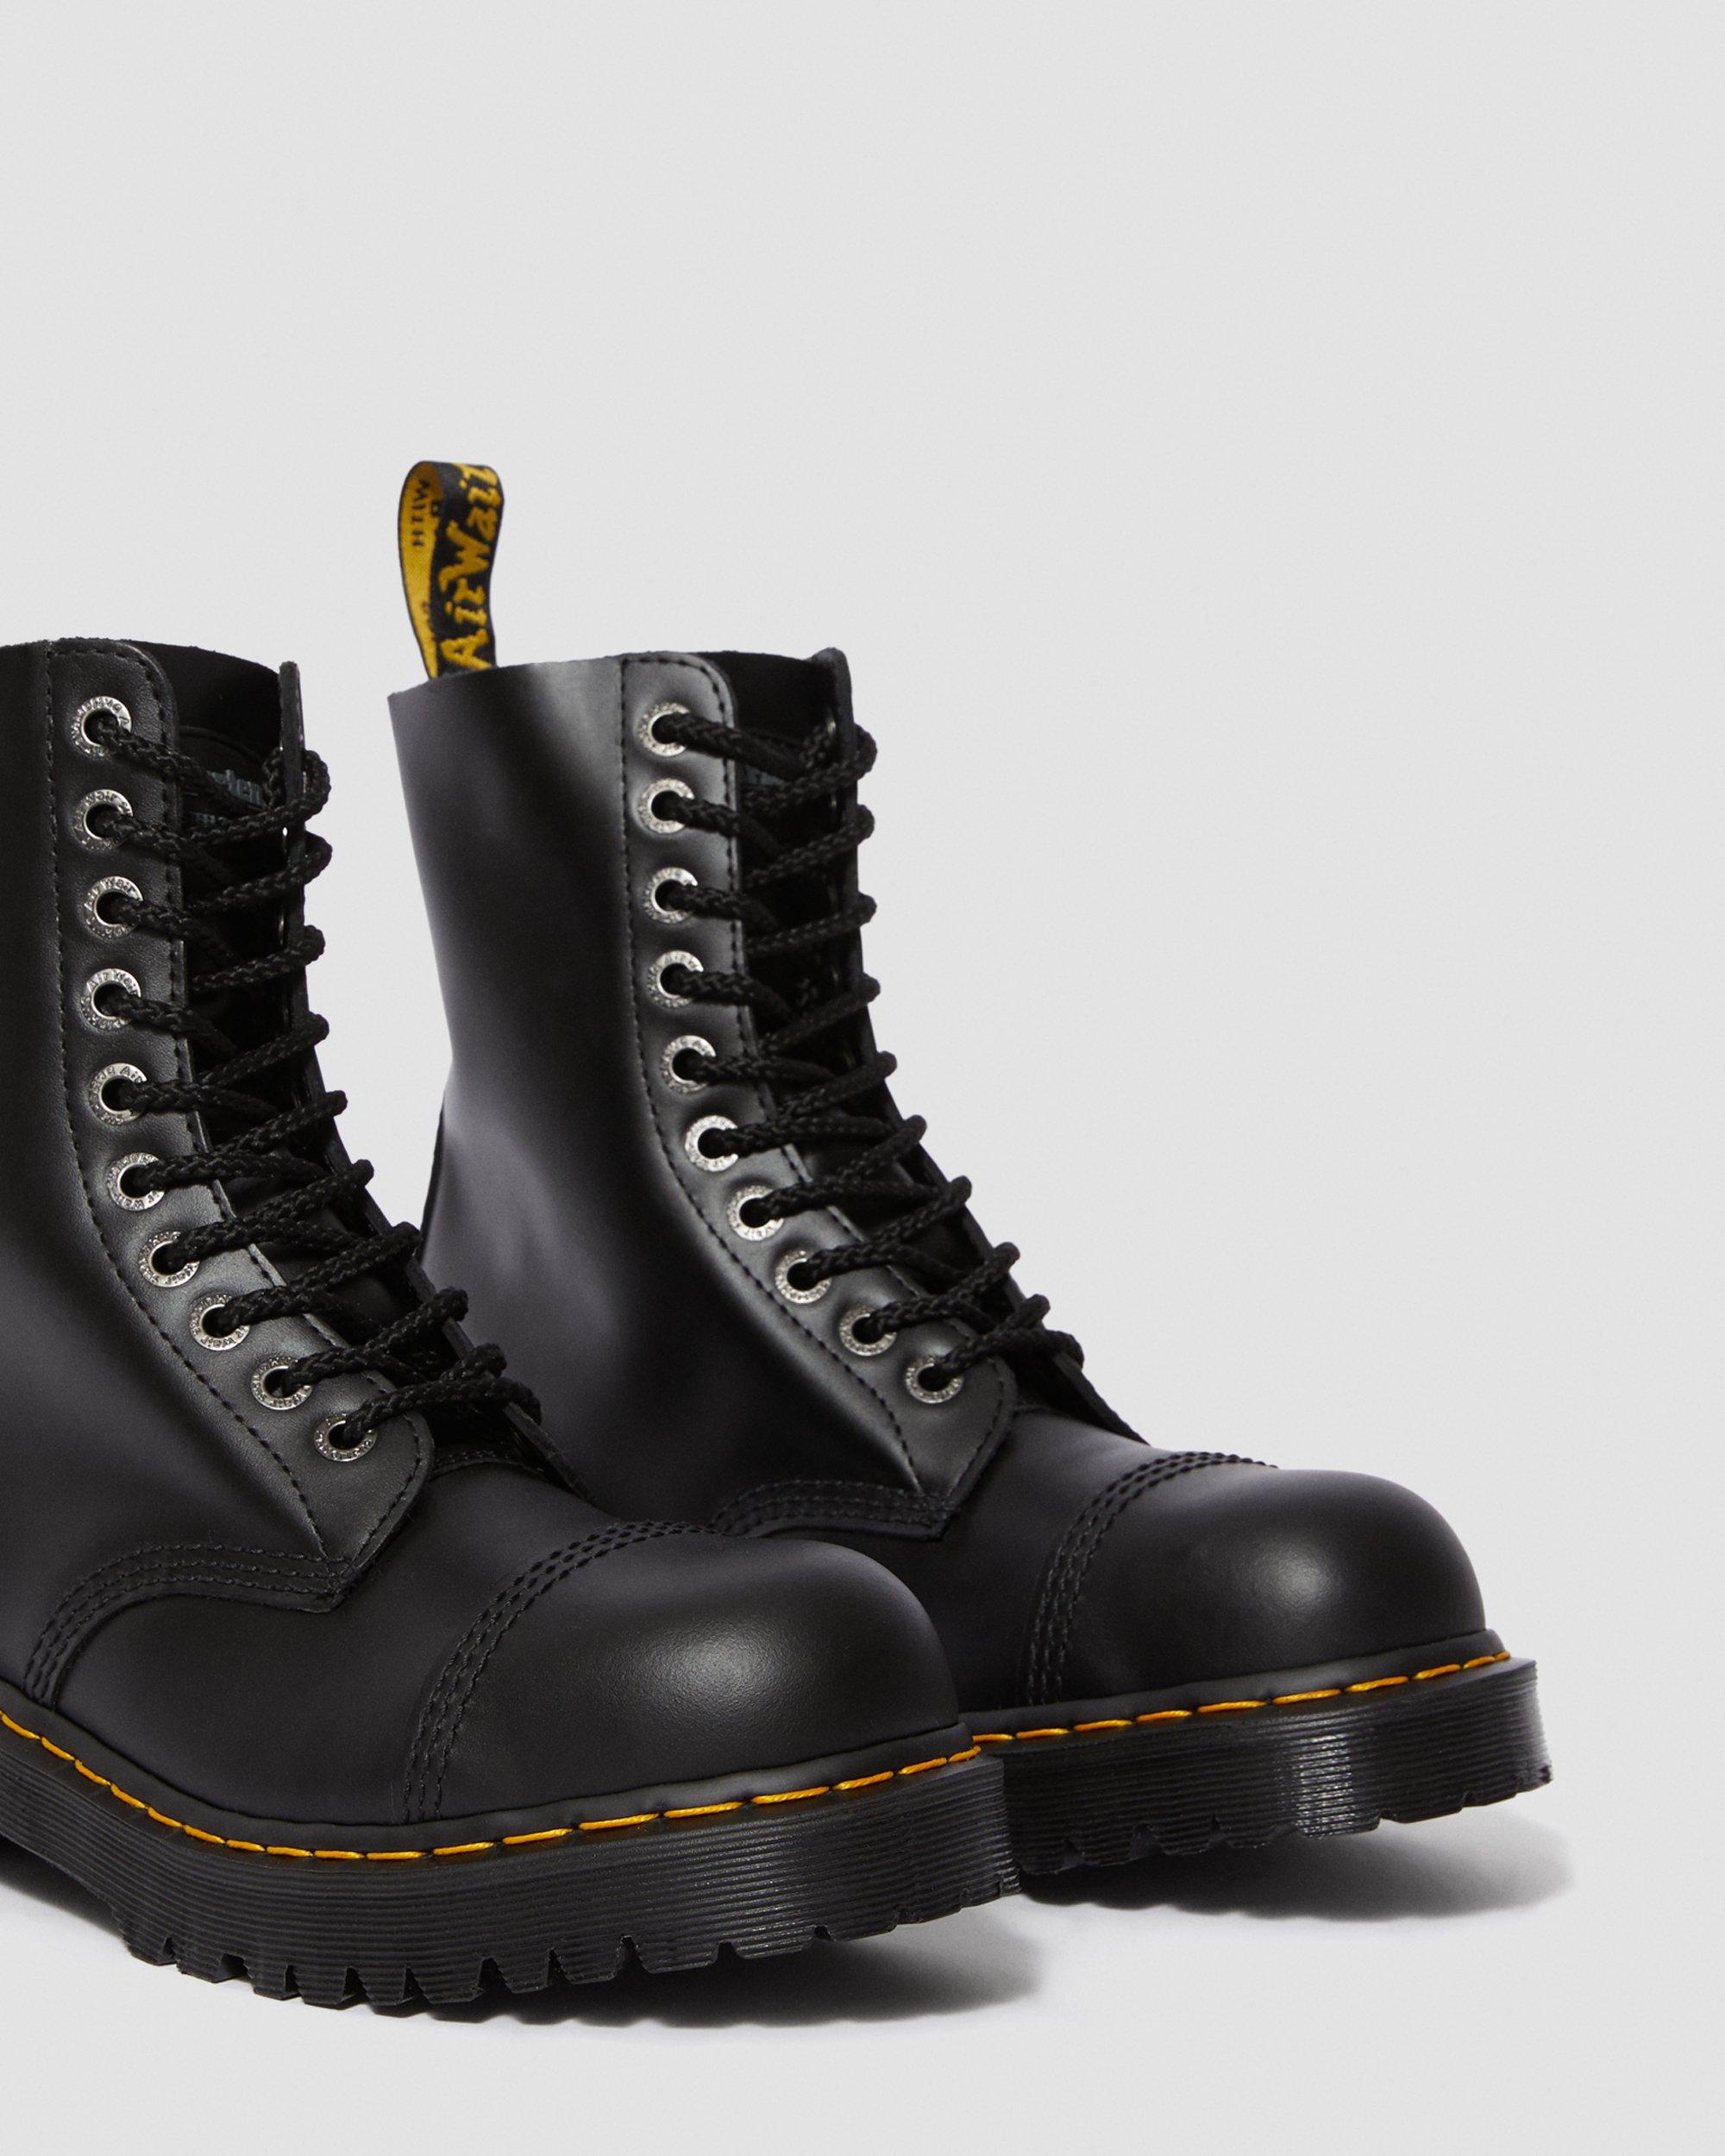 8761 Bxb Leather Mid Calf Boots Dr. Martens